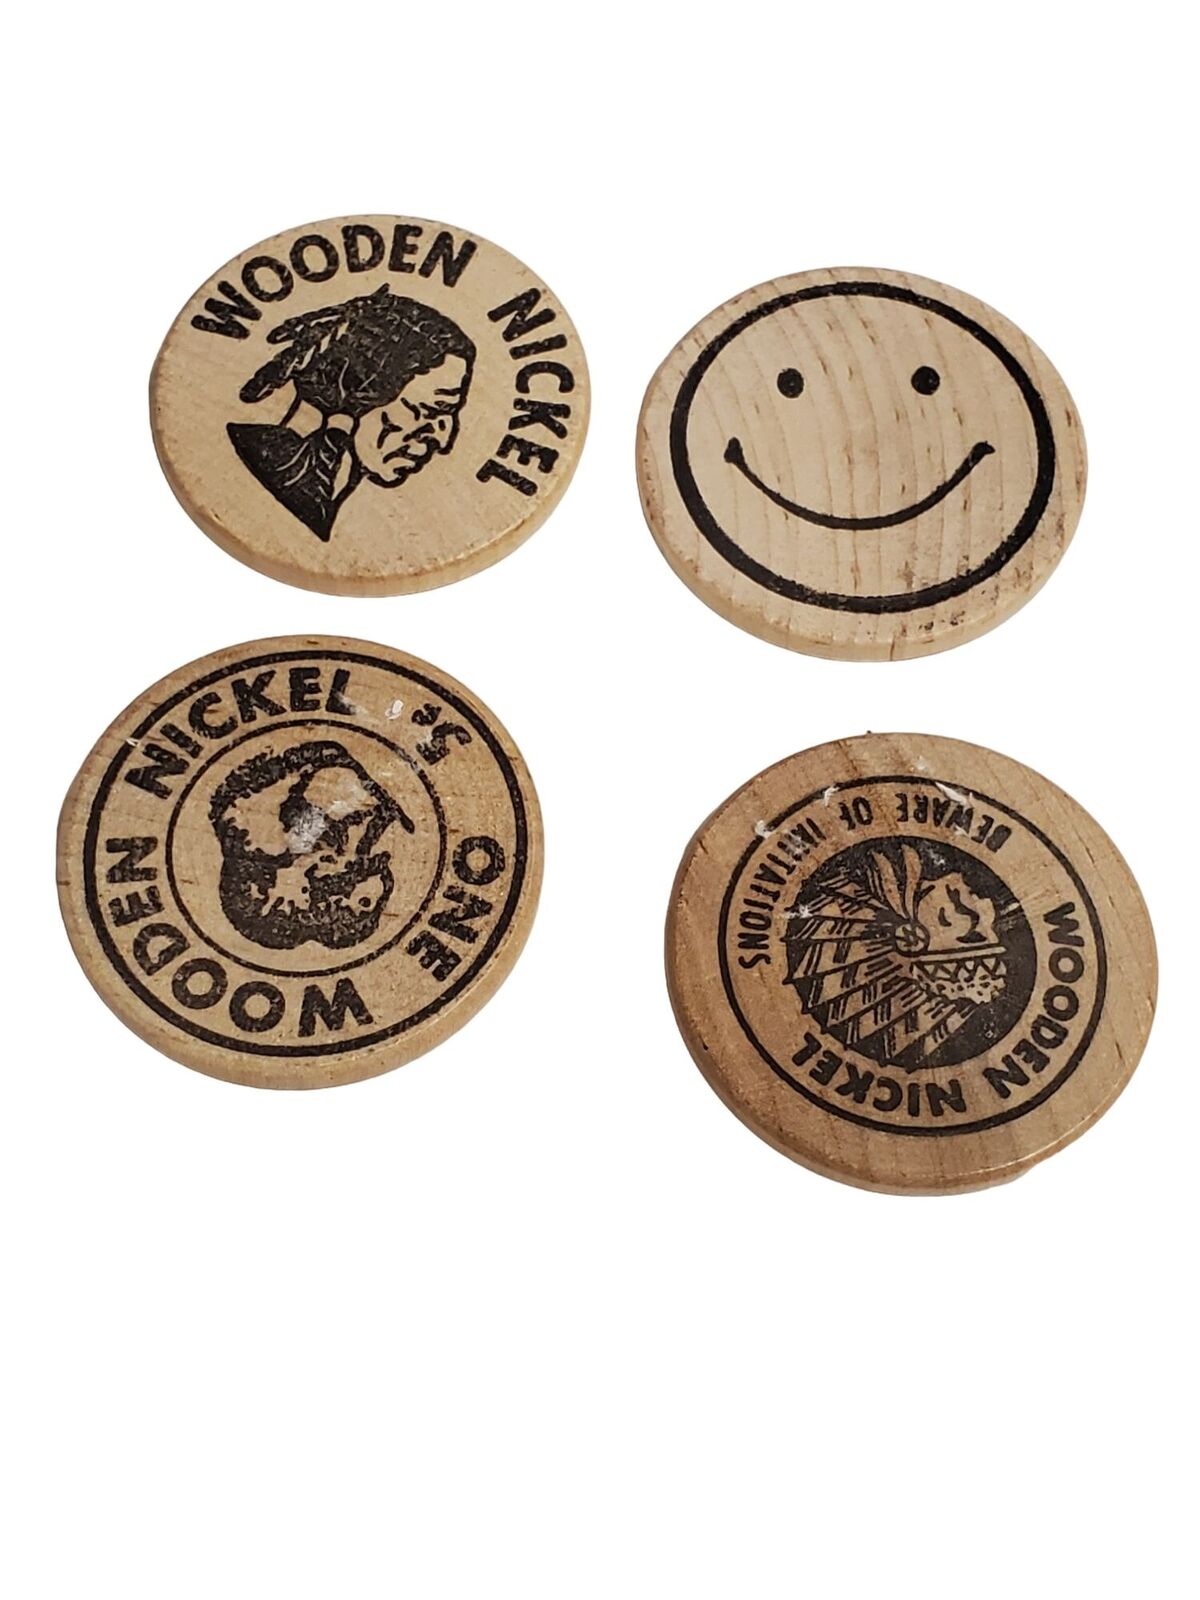 Wood Smiley face nickel mixed lot round chips Sesquicentennial set of 4